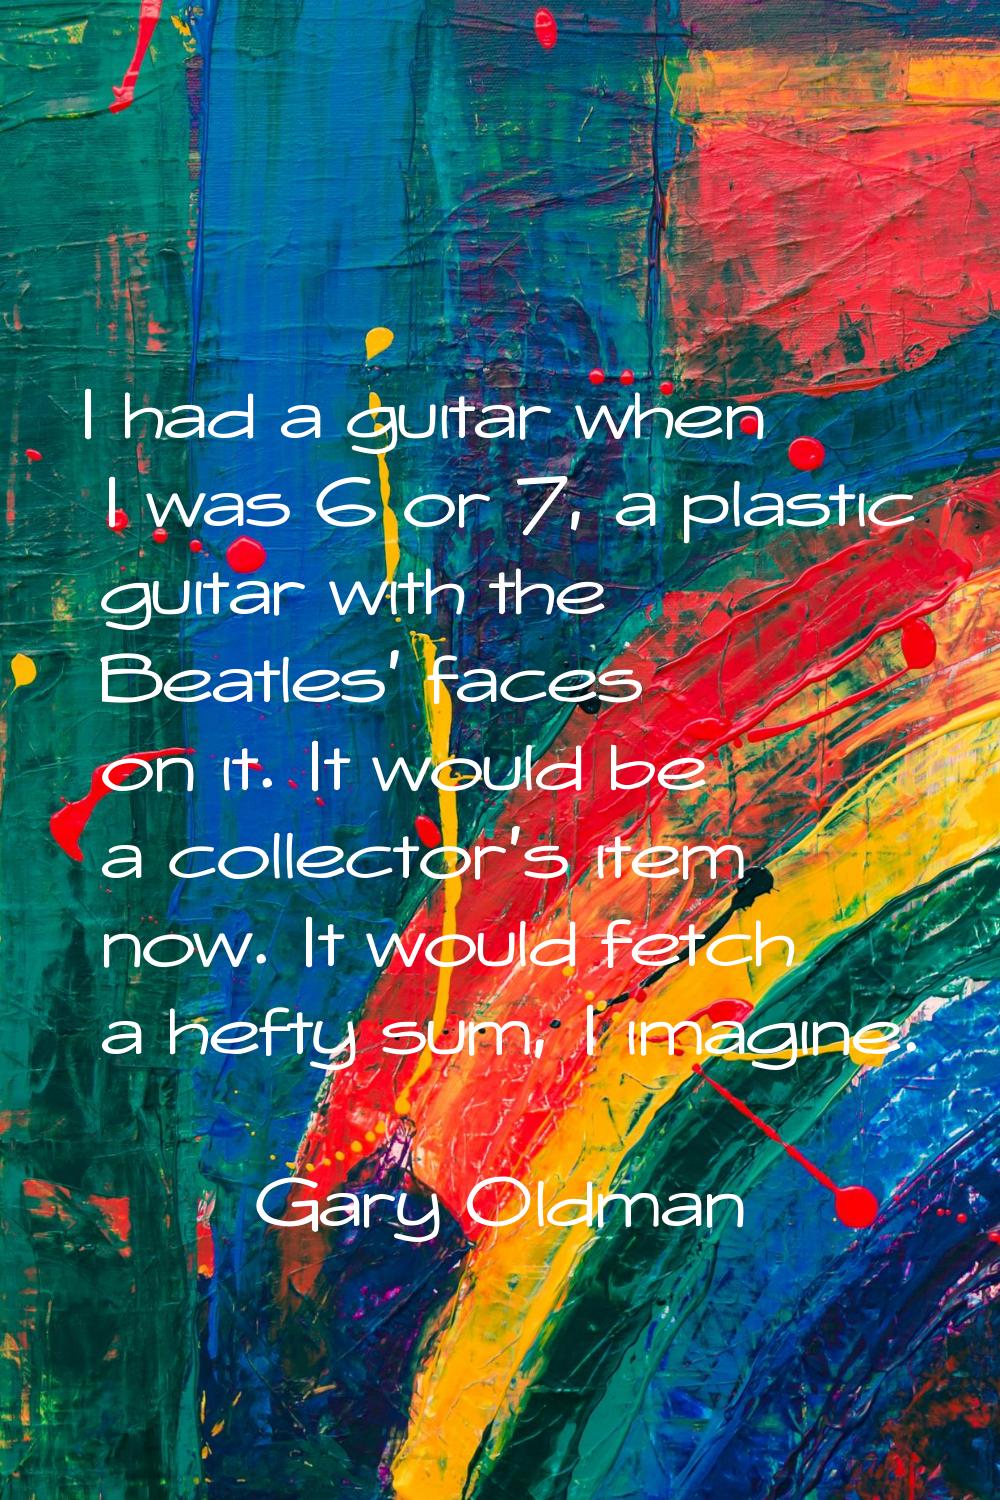 I had a guitar when I was 6 or 7, a plastic guitar with the Beatles' faces on it. It would be a col